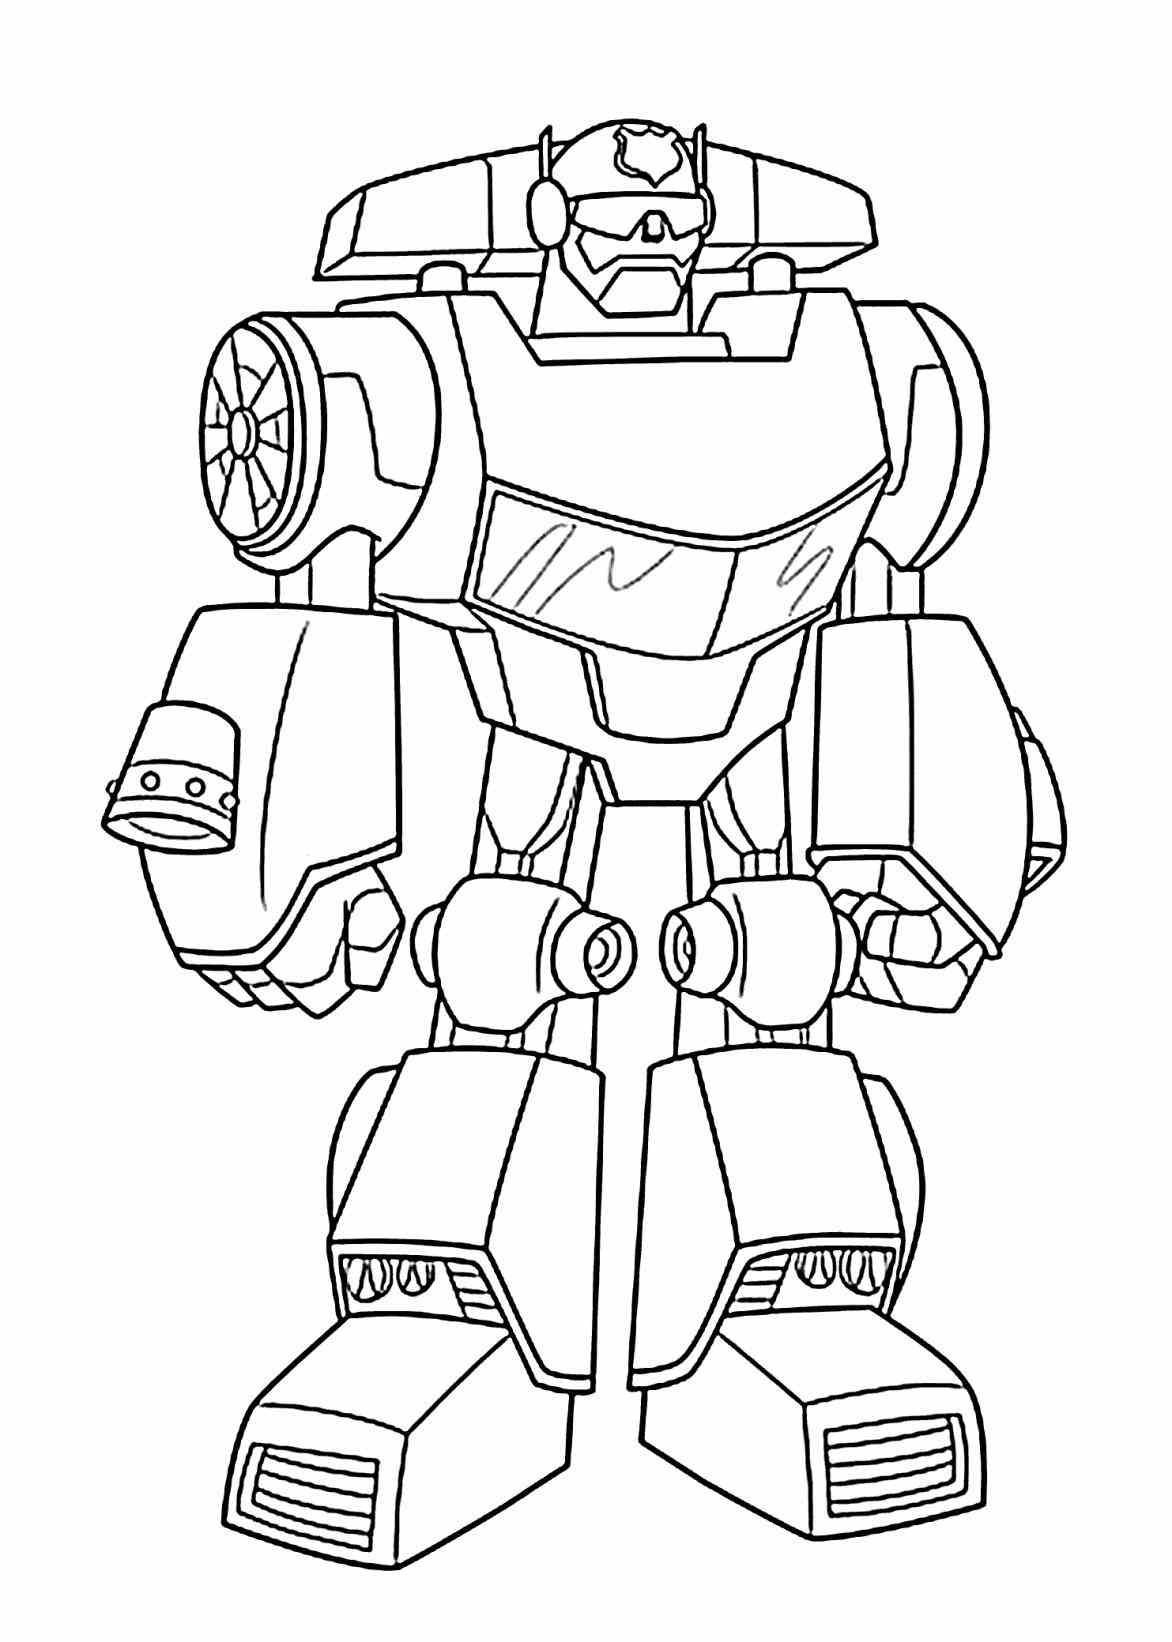 coloring-bumblebee-coloring-page-transformers-bumblebee-coloring-page